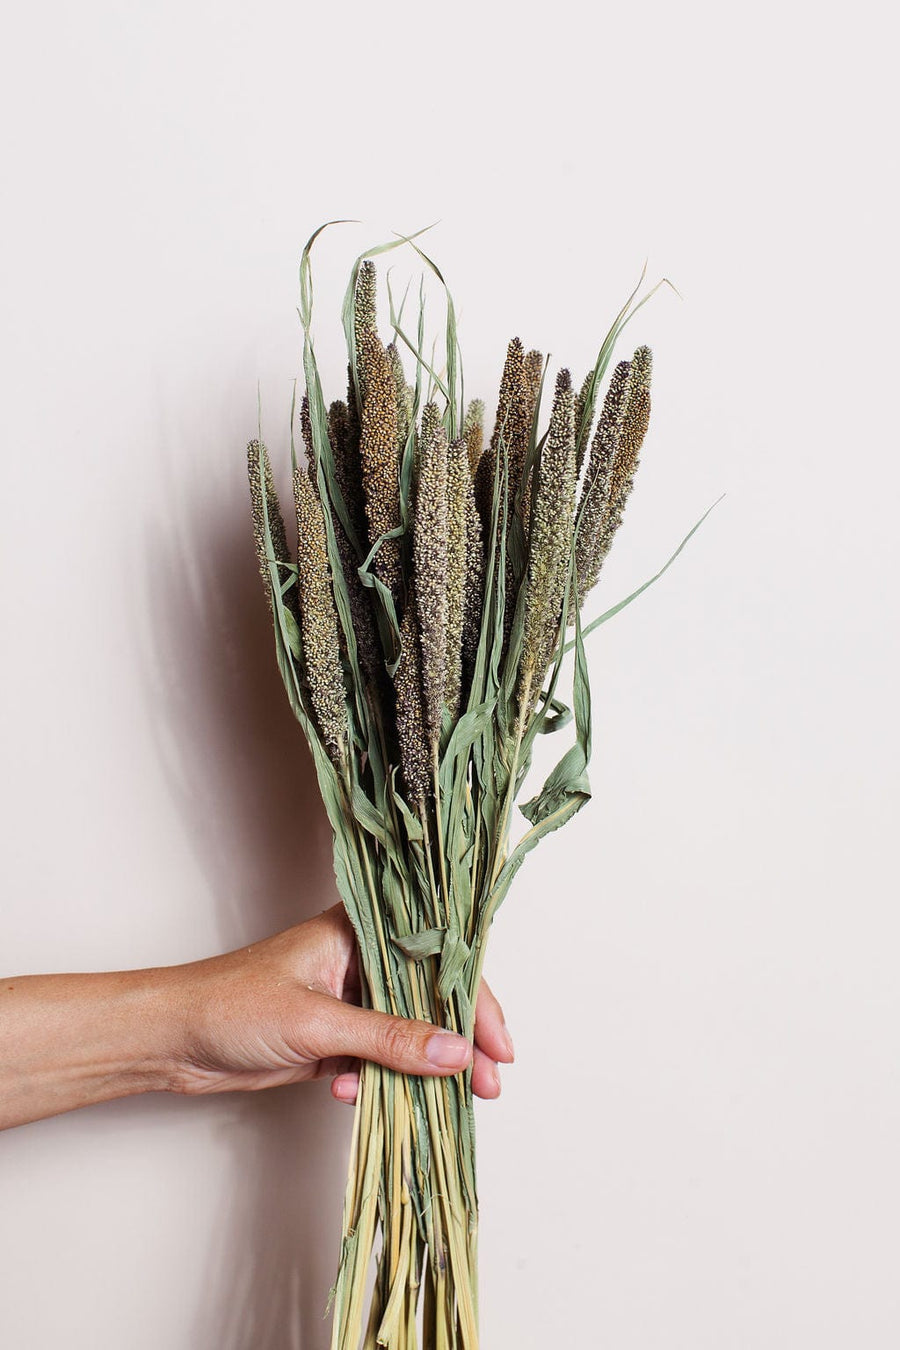 Idlewild Floral Co. Bunches Green Millet